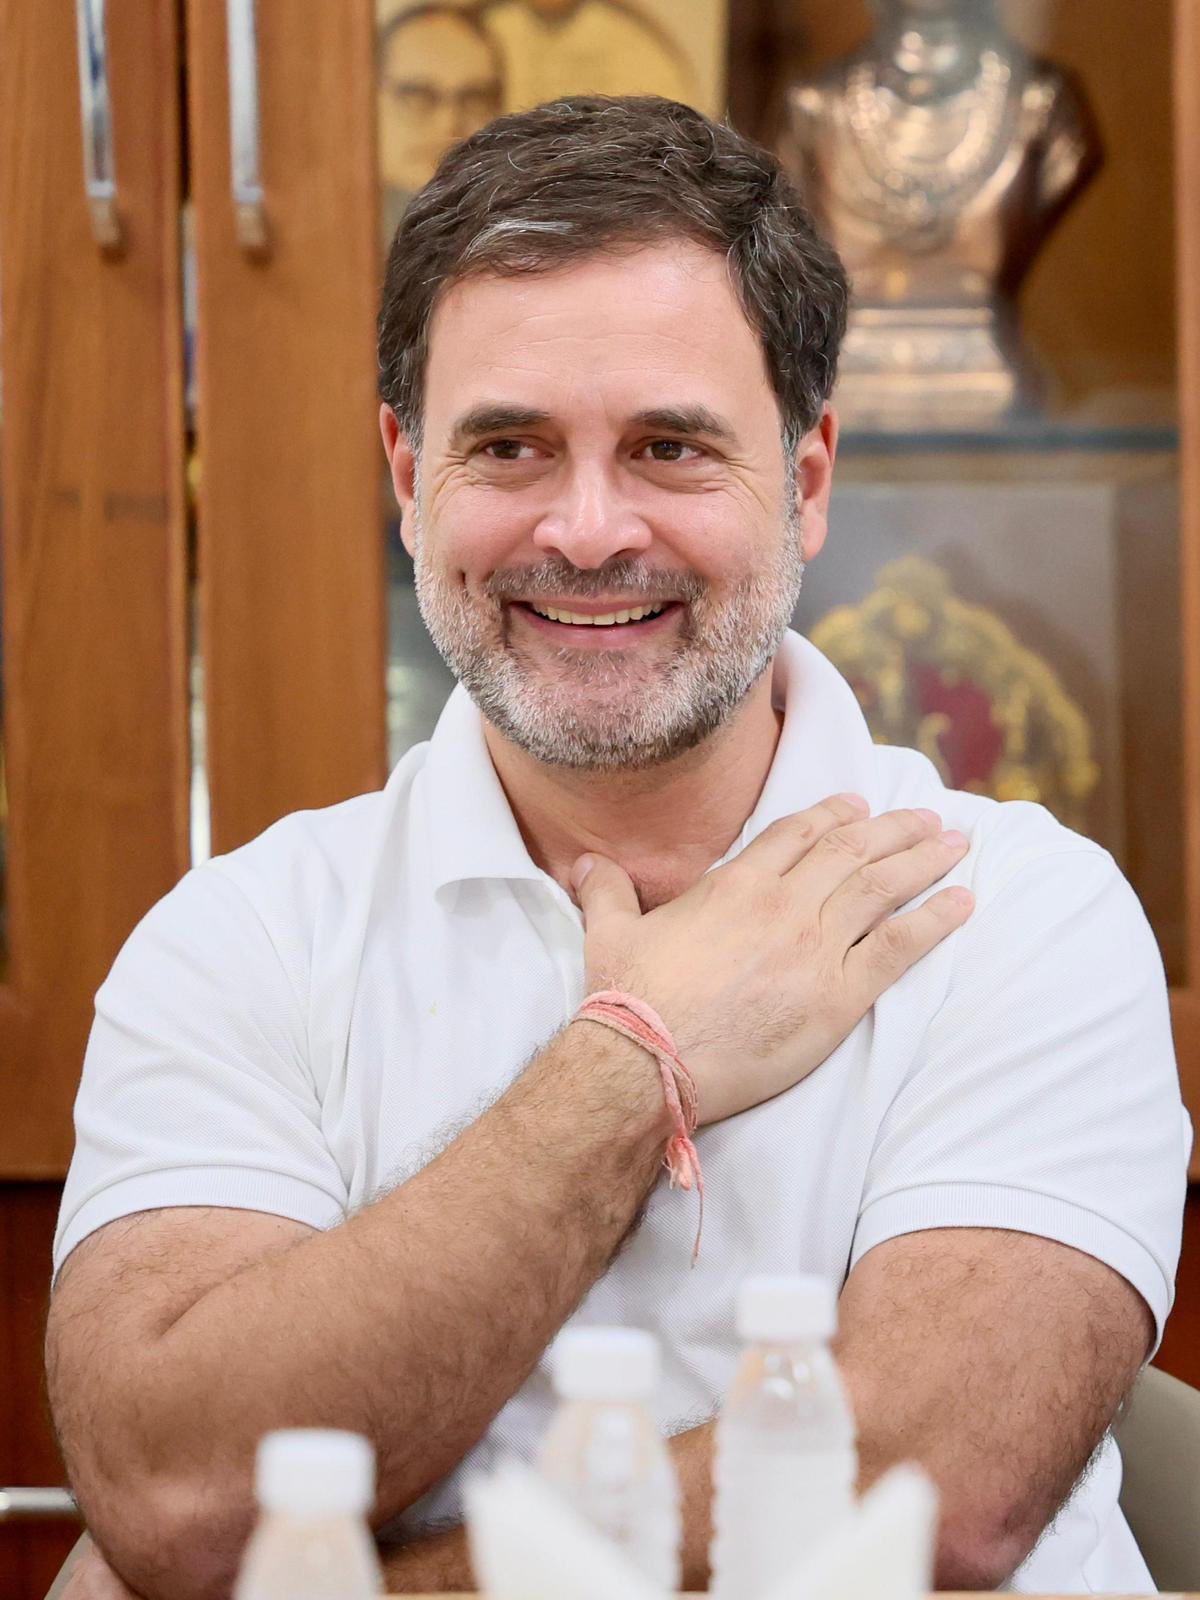 Congress MP Rahul Gandhi has been appointed as the Leader of Opposition in the Lok Sabha